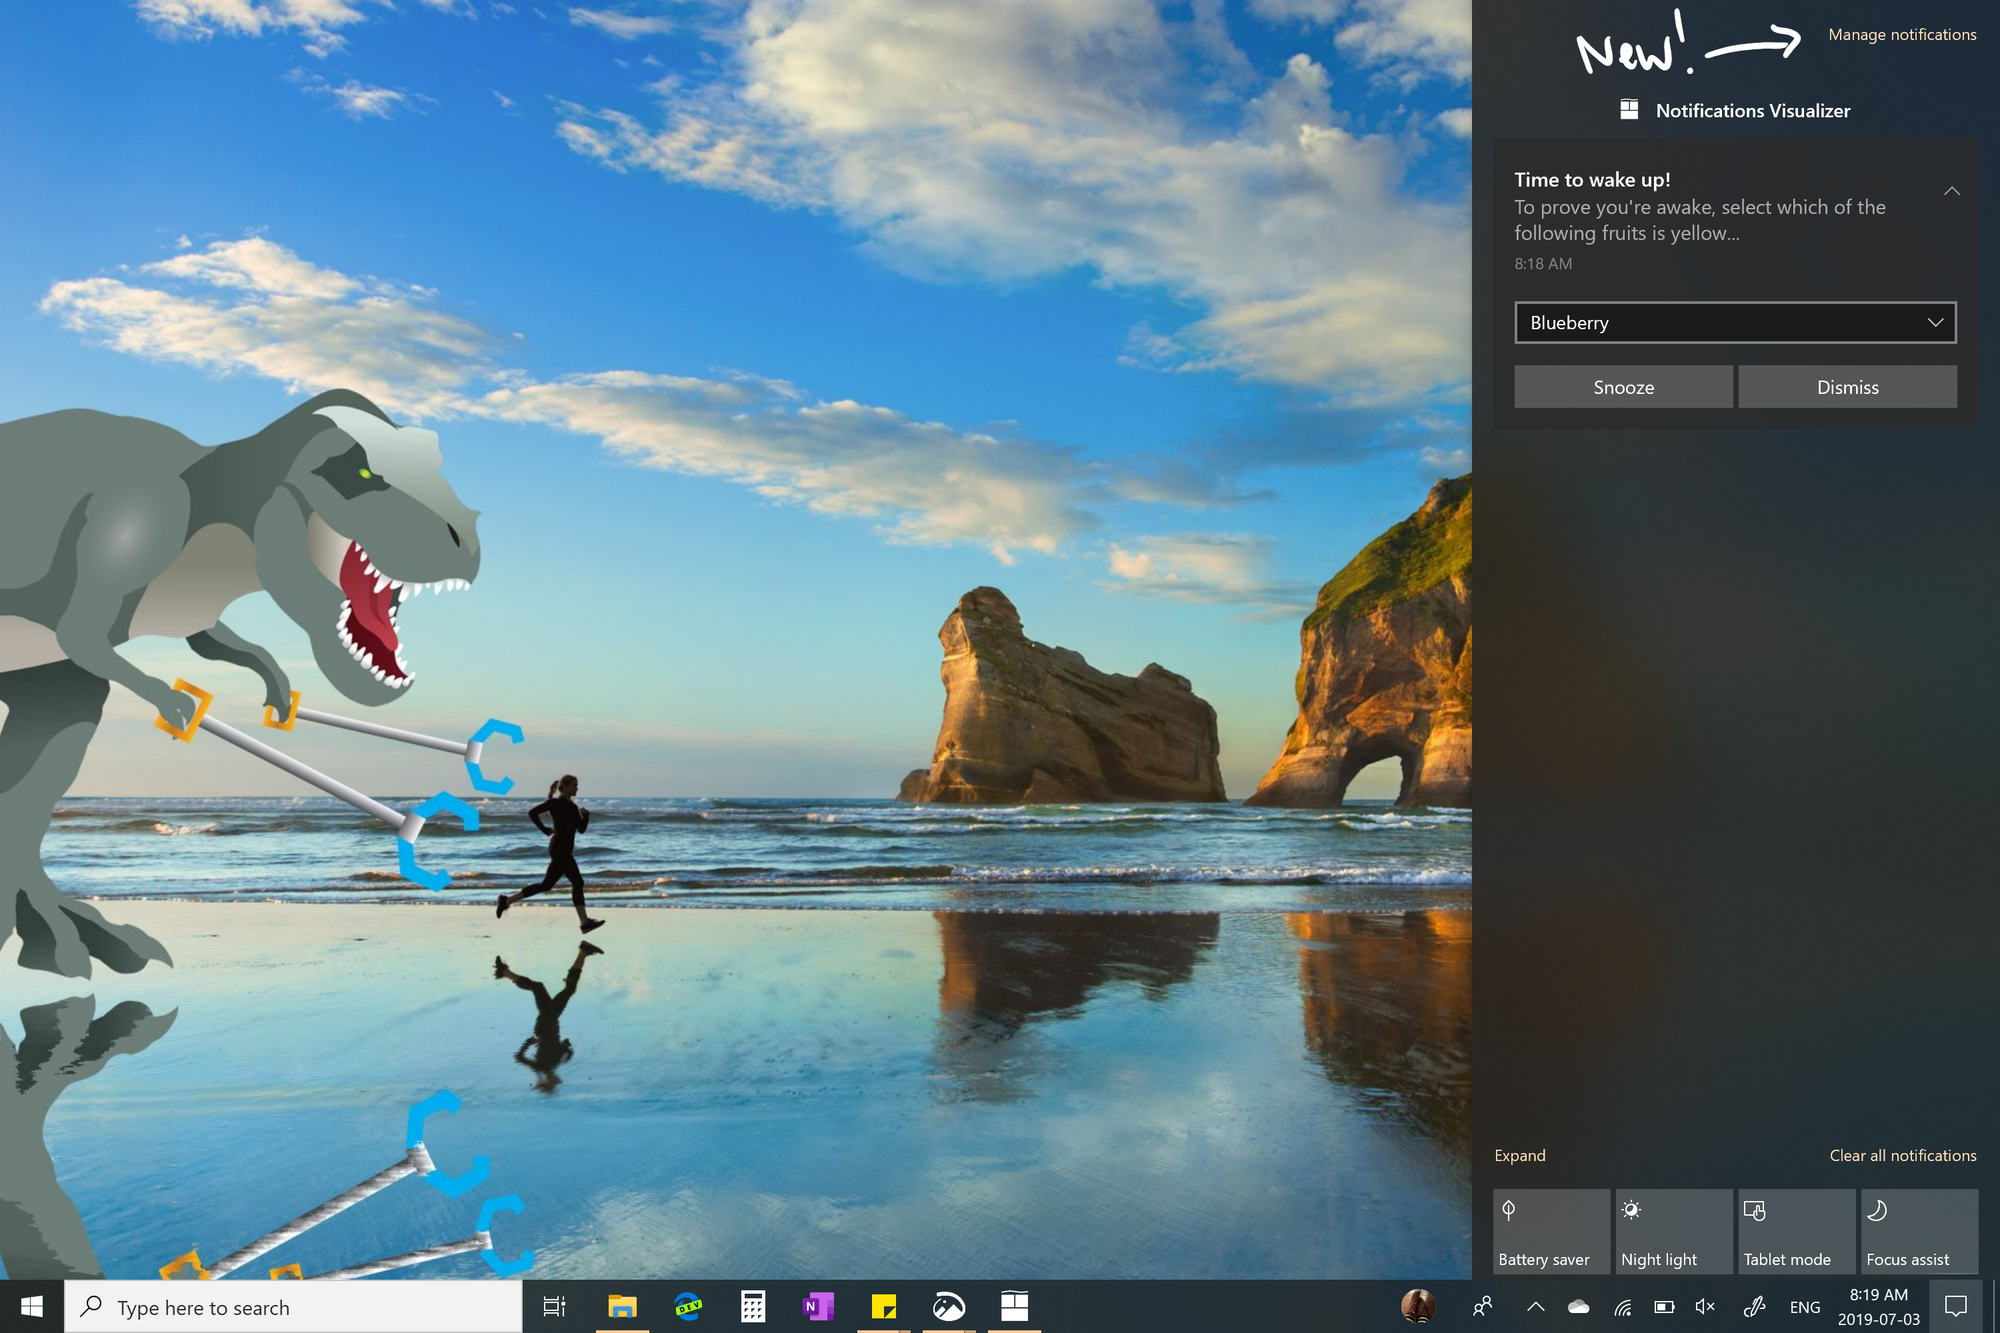 New Windows 10 Insider Preview Fast+Skip Build 18932 (20H1) - July 3 1dfcf6c7a78fc04fd7400f8e16b4a468.png